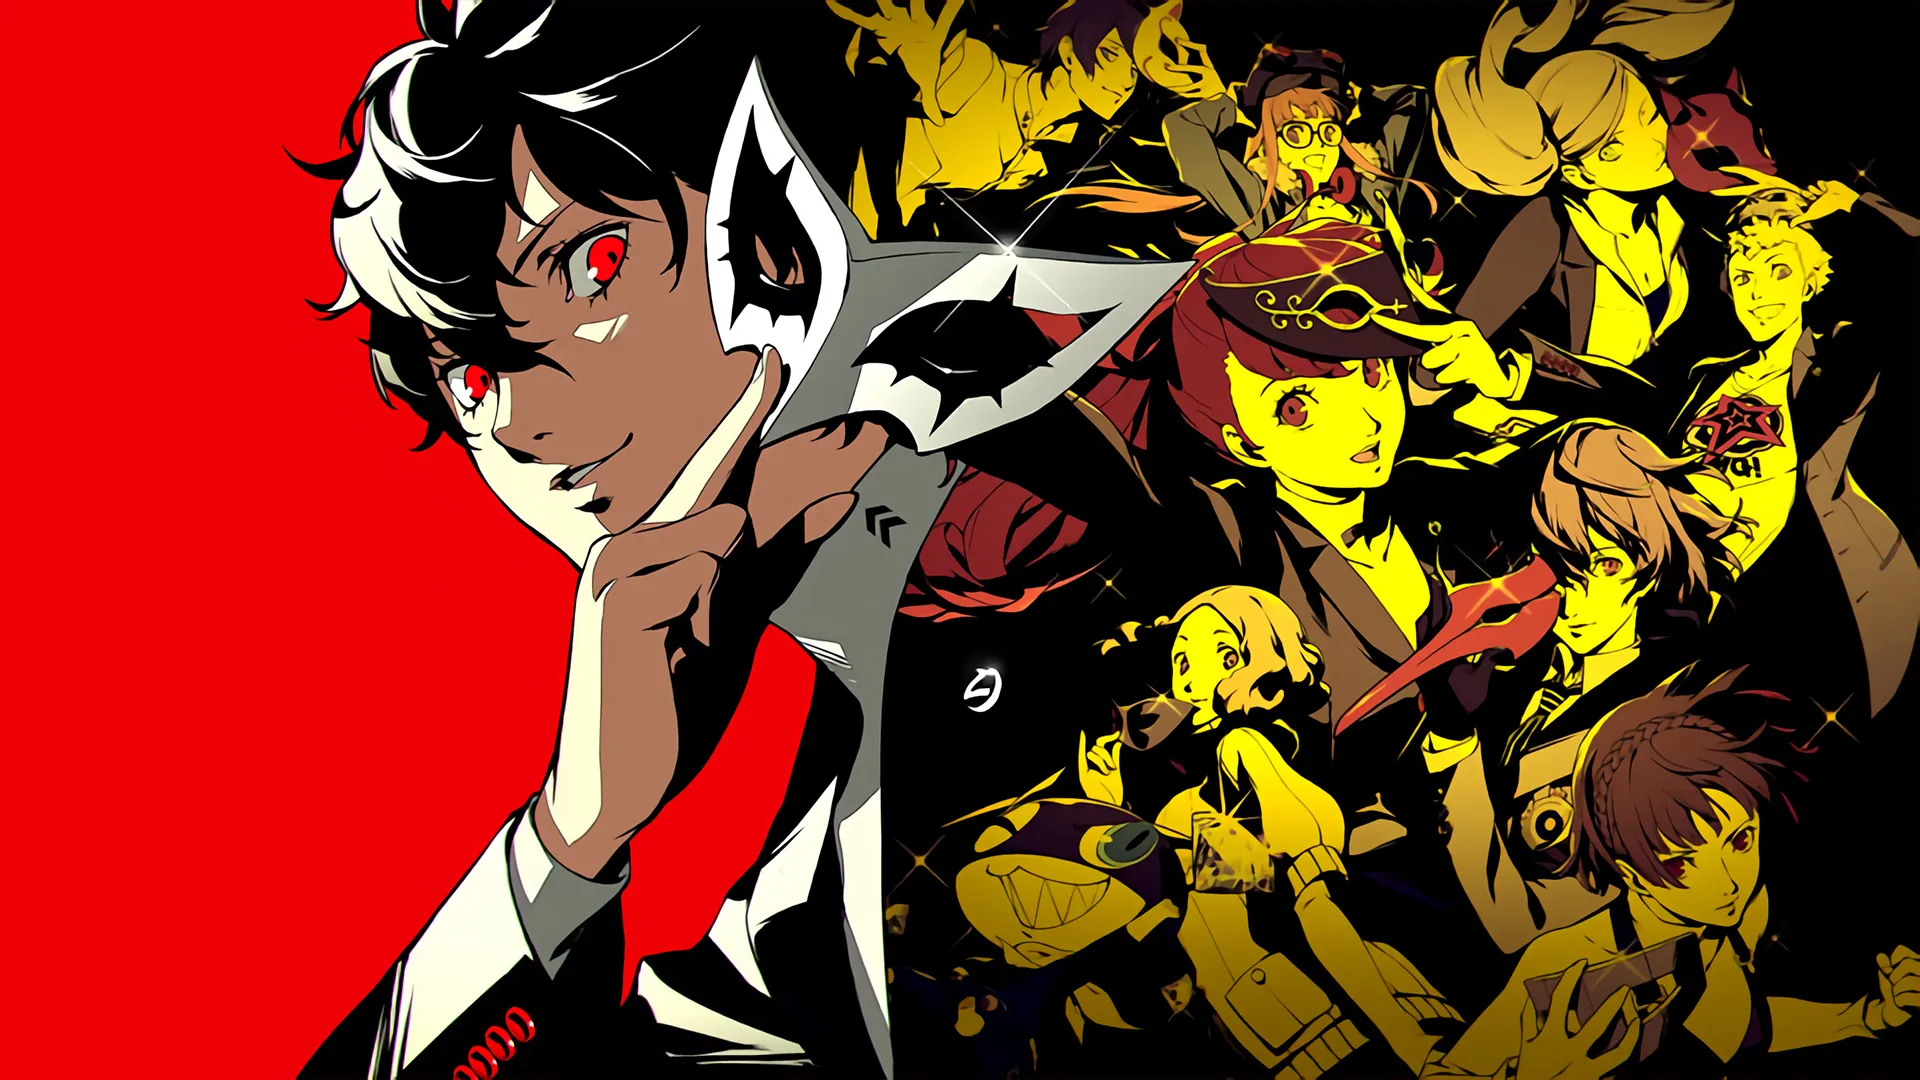 Review: ‘Persona 5 Royal’ shines on the Nintendo Switch